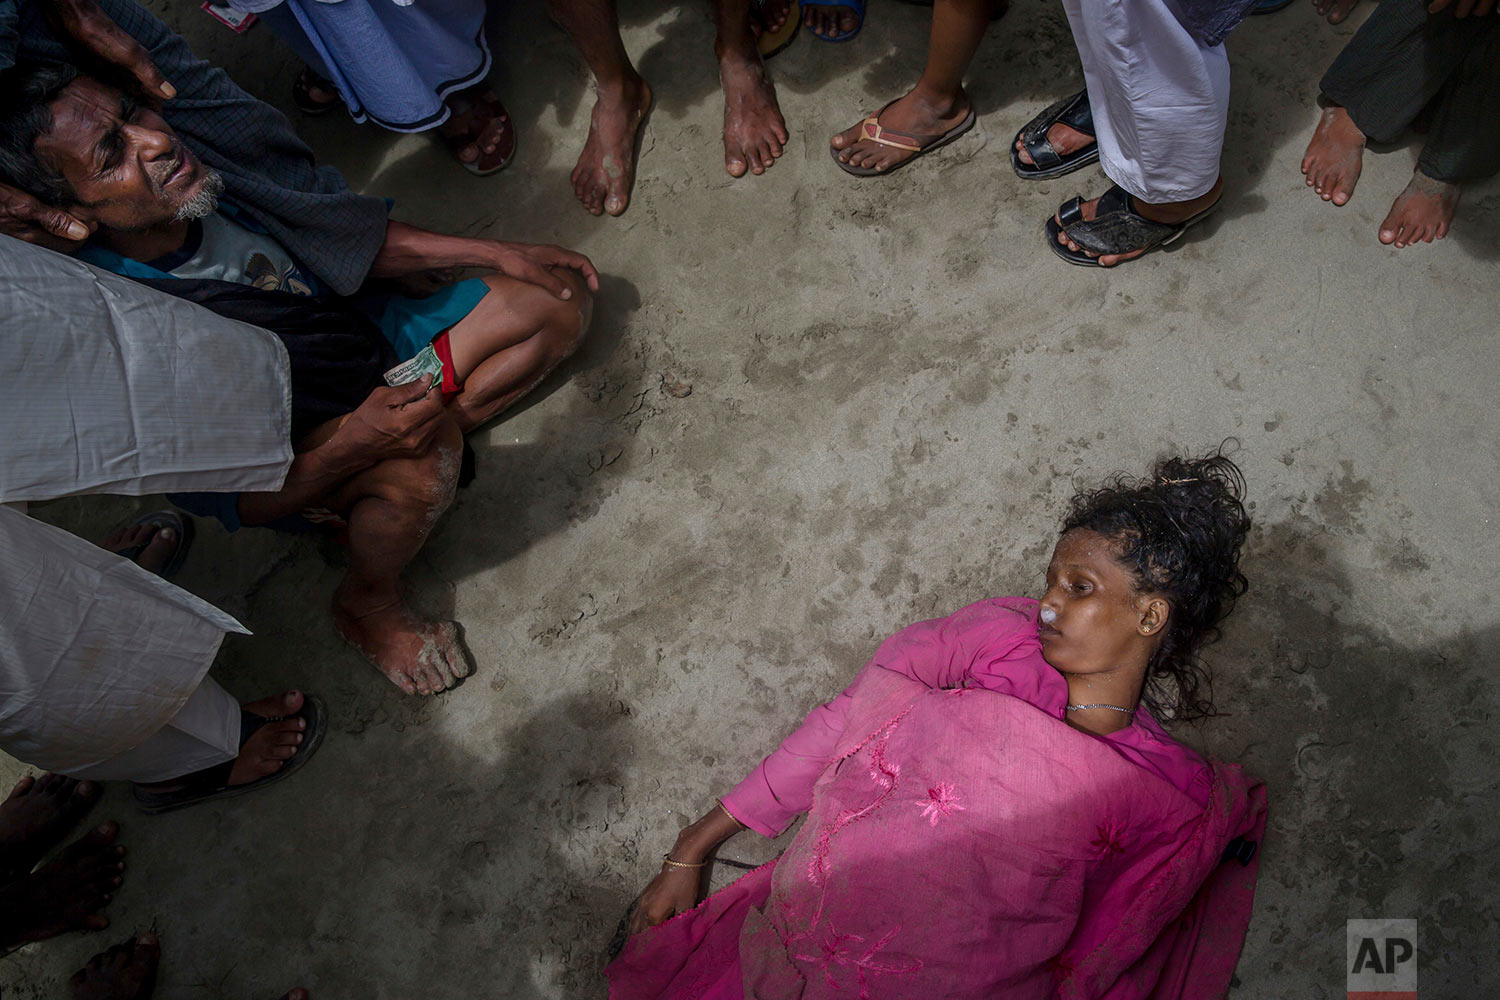  A Rohingya Muslim man Mohammad Islam sits beside the body of his daughter-in-law Anwara Begum who died when the boat they were traveling in capsized minutes before reaching shore in Shah Porir Dwip, Bangladesh, Thursday, Sept. 14, 2017. (AP Photo/Da